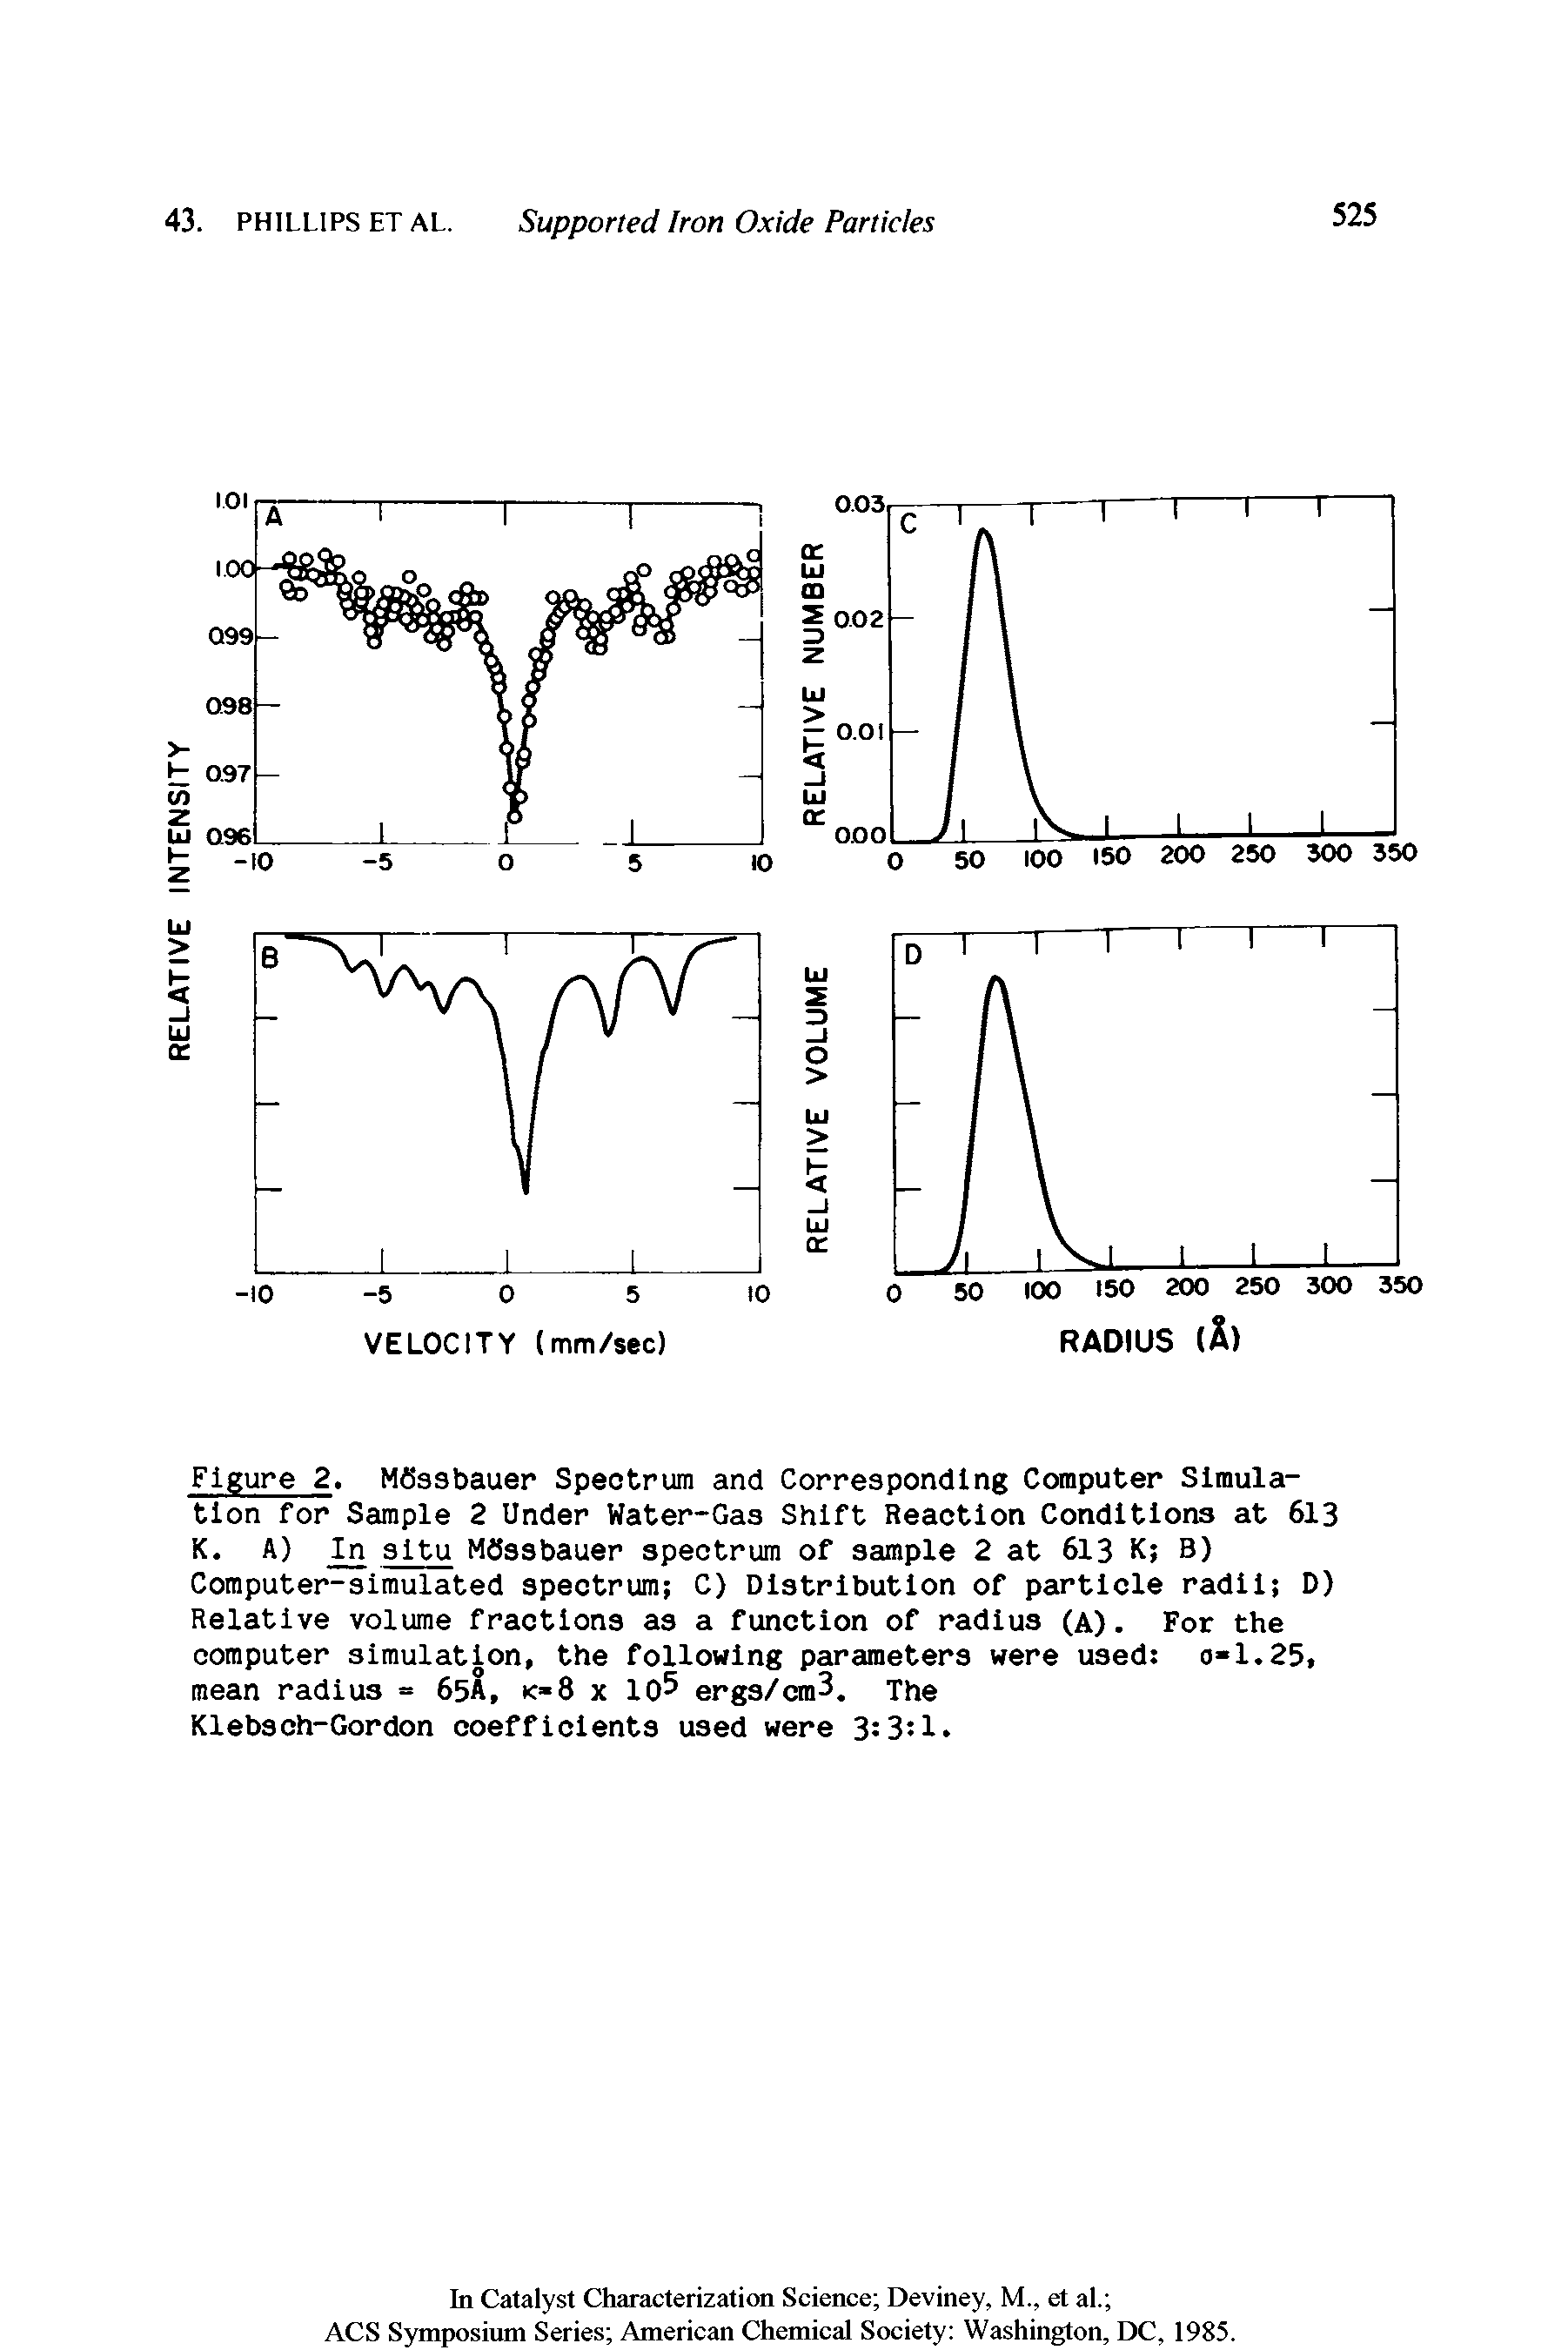 Figure 2. MSssbauer Spectrum and Corresponding Computer Simulation for Sample 2 Under Water-Gas Shift Reaction Conditions at 613 K. A) situ MSssbauer spectrum of sample 2 at 613 K B) Computer-simulated spectrum C) Distribution of particle radii D) Relative volume fractions as a function of radius (A). For the computer simulation, the following pareimeters were used 0-1.25, mean radius = 65A, k-8 x 10 ergs/cm3. The Klebsch-Gordon coefficients used were 3 3 1.